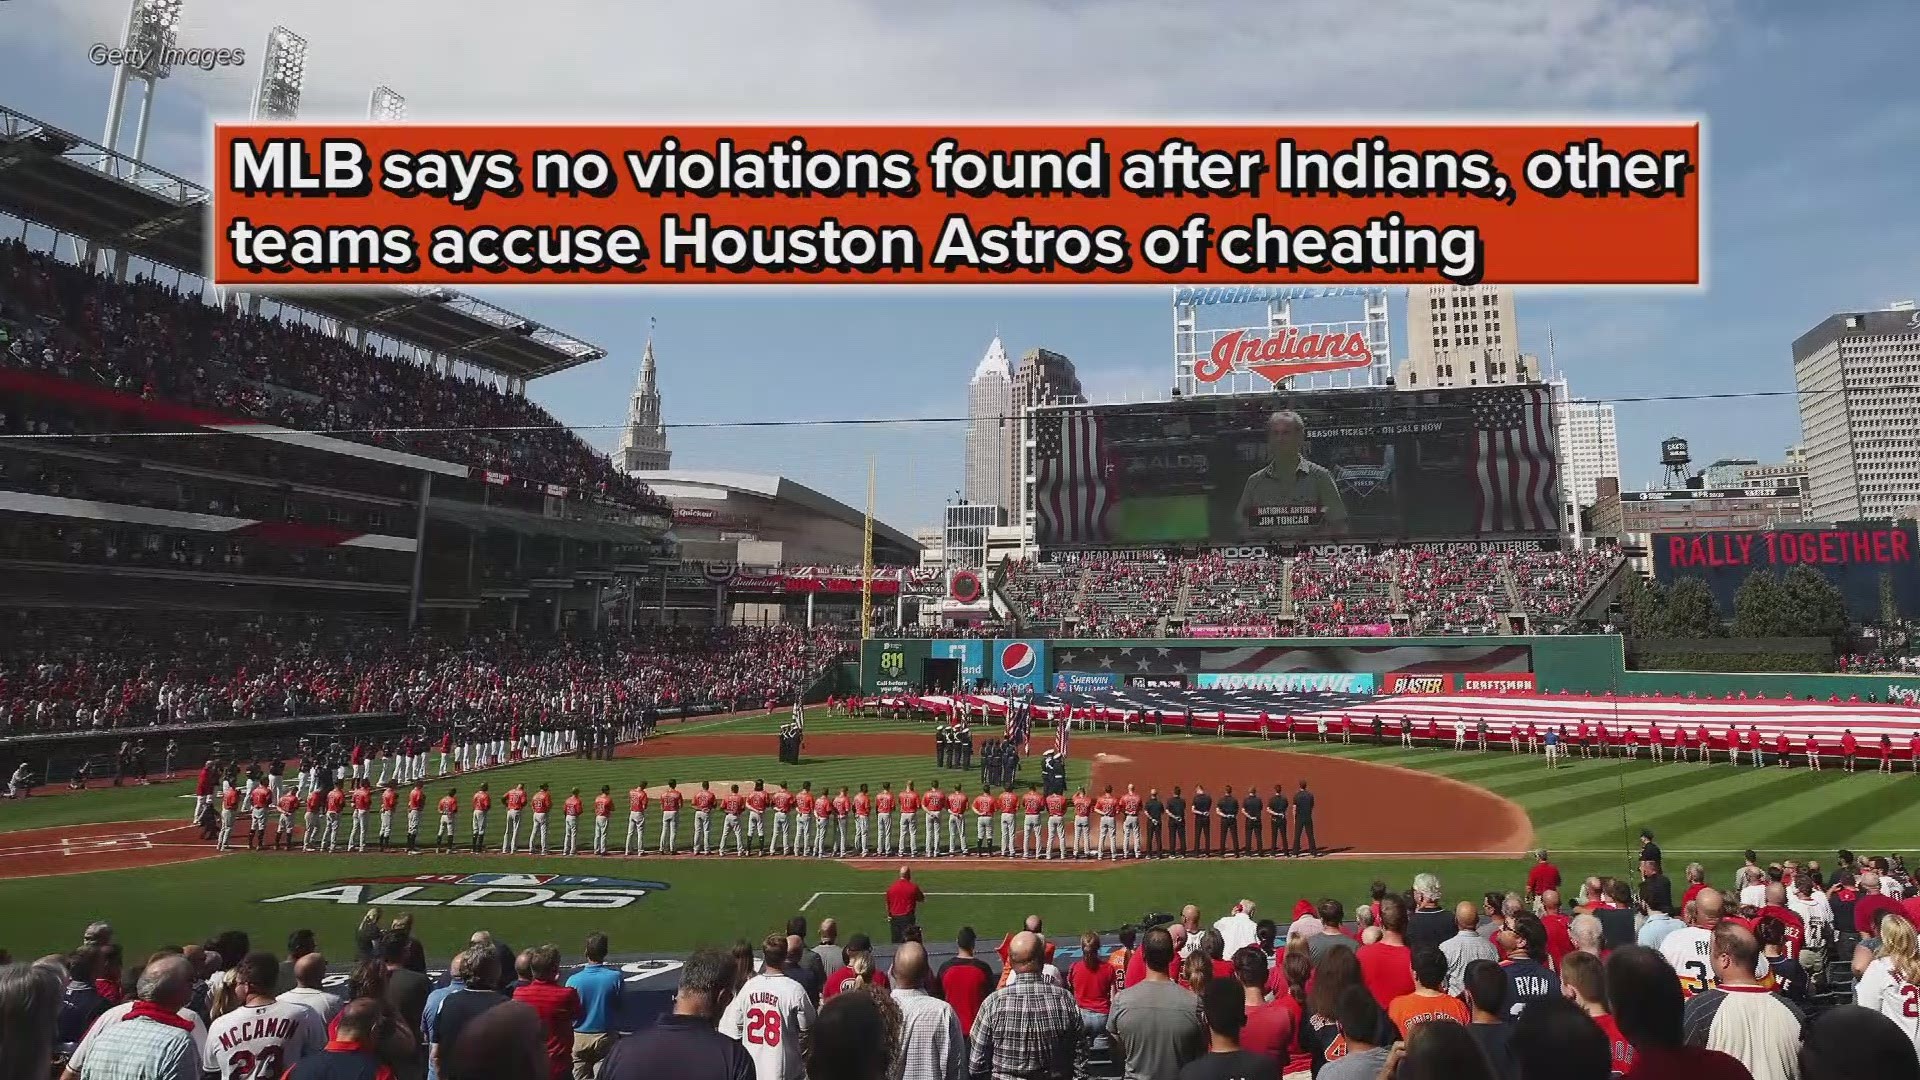 MLB says no violations found after Cleveland Indians, other teams accuse Houston Astros of cheating